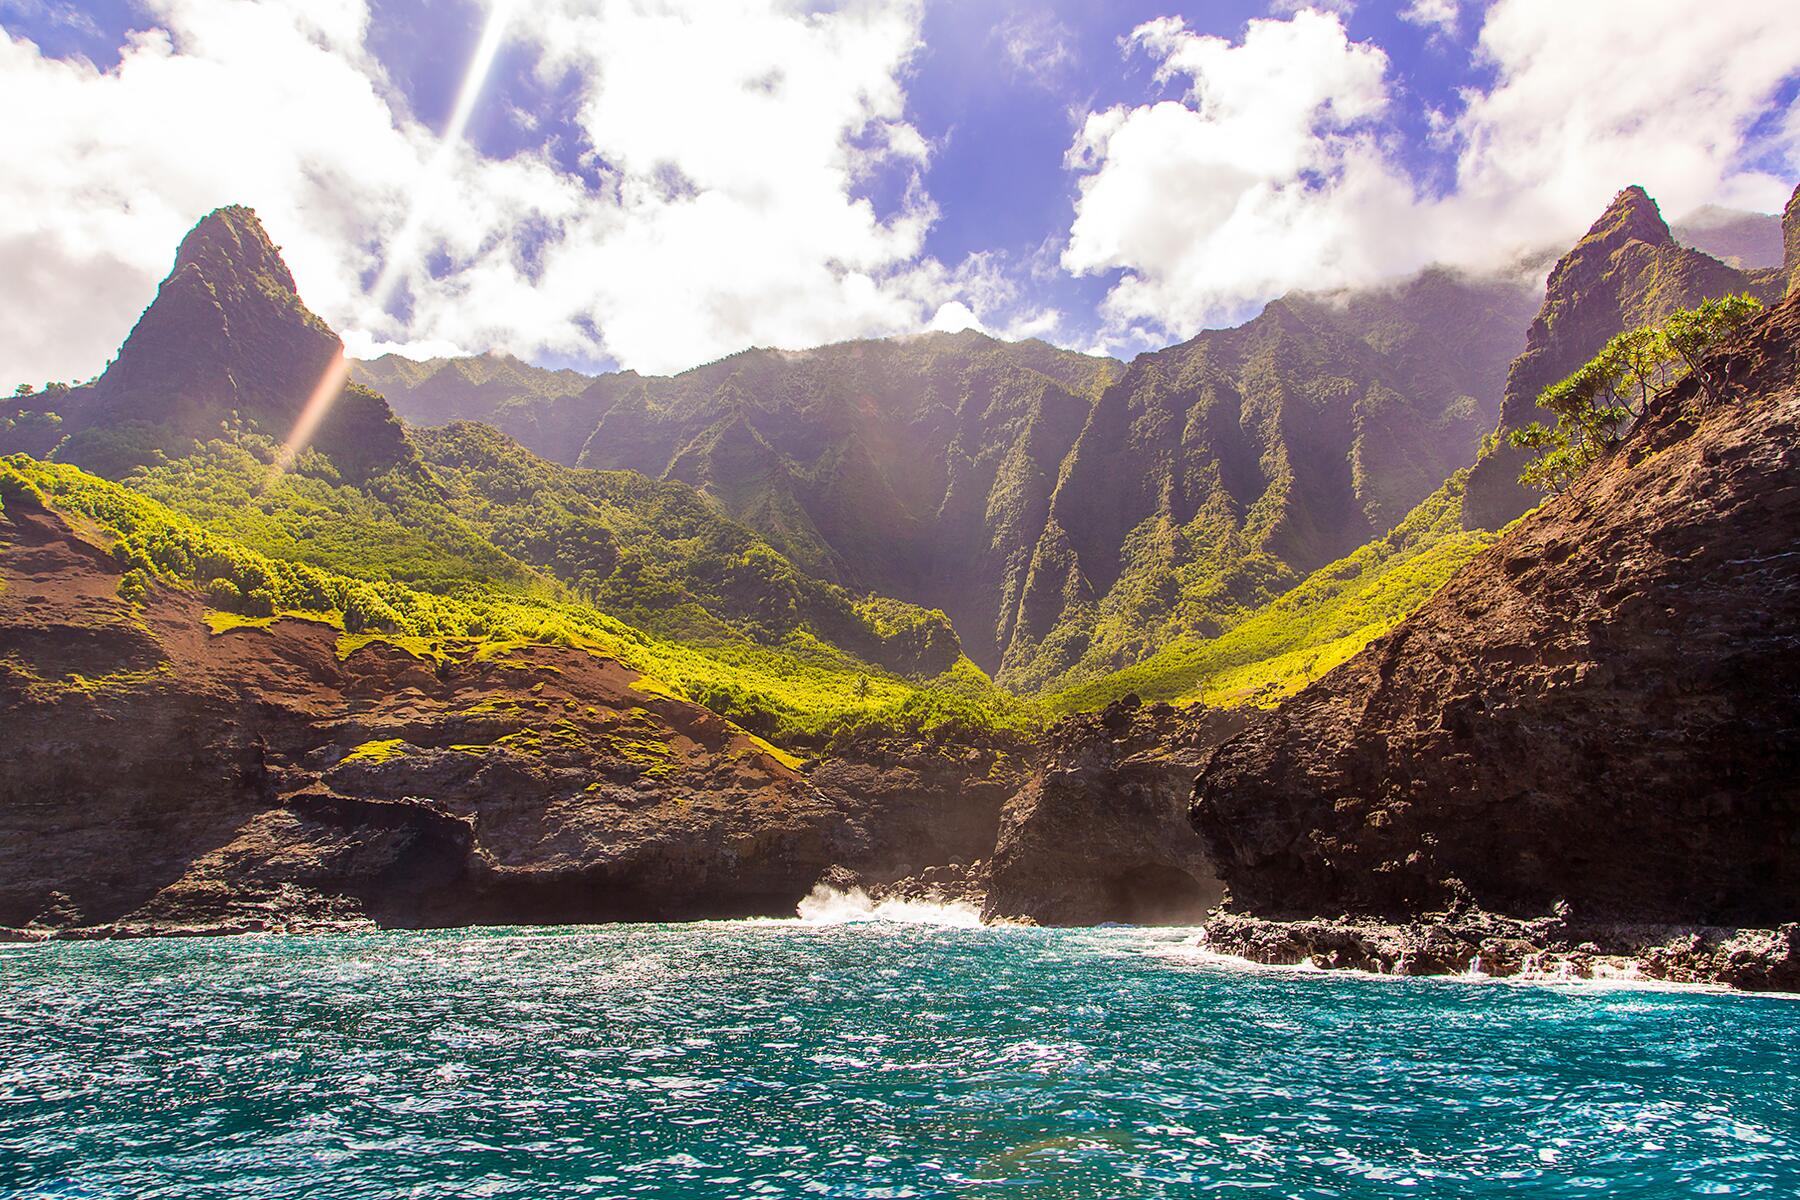 <a href='https://www.fodors.com/world/north-america/usa/hawaii/kauai/experiences/news/photos/24-ultimate-things-to-do-in-kauai#'>From &quot;30 Ultimate Things to Do in Kauai: Visit Famous Film Locations&quot;</a>